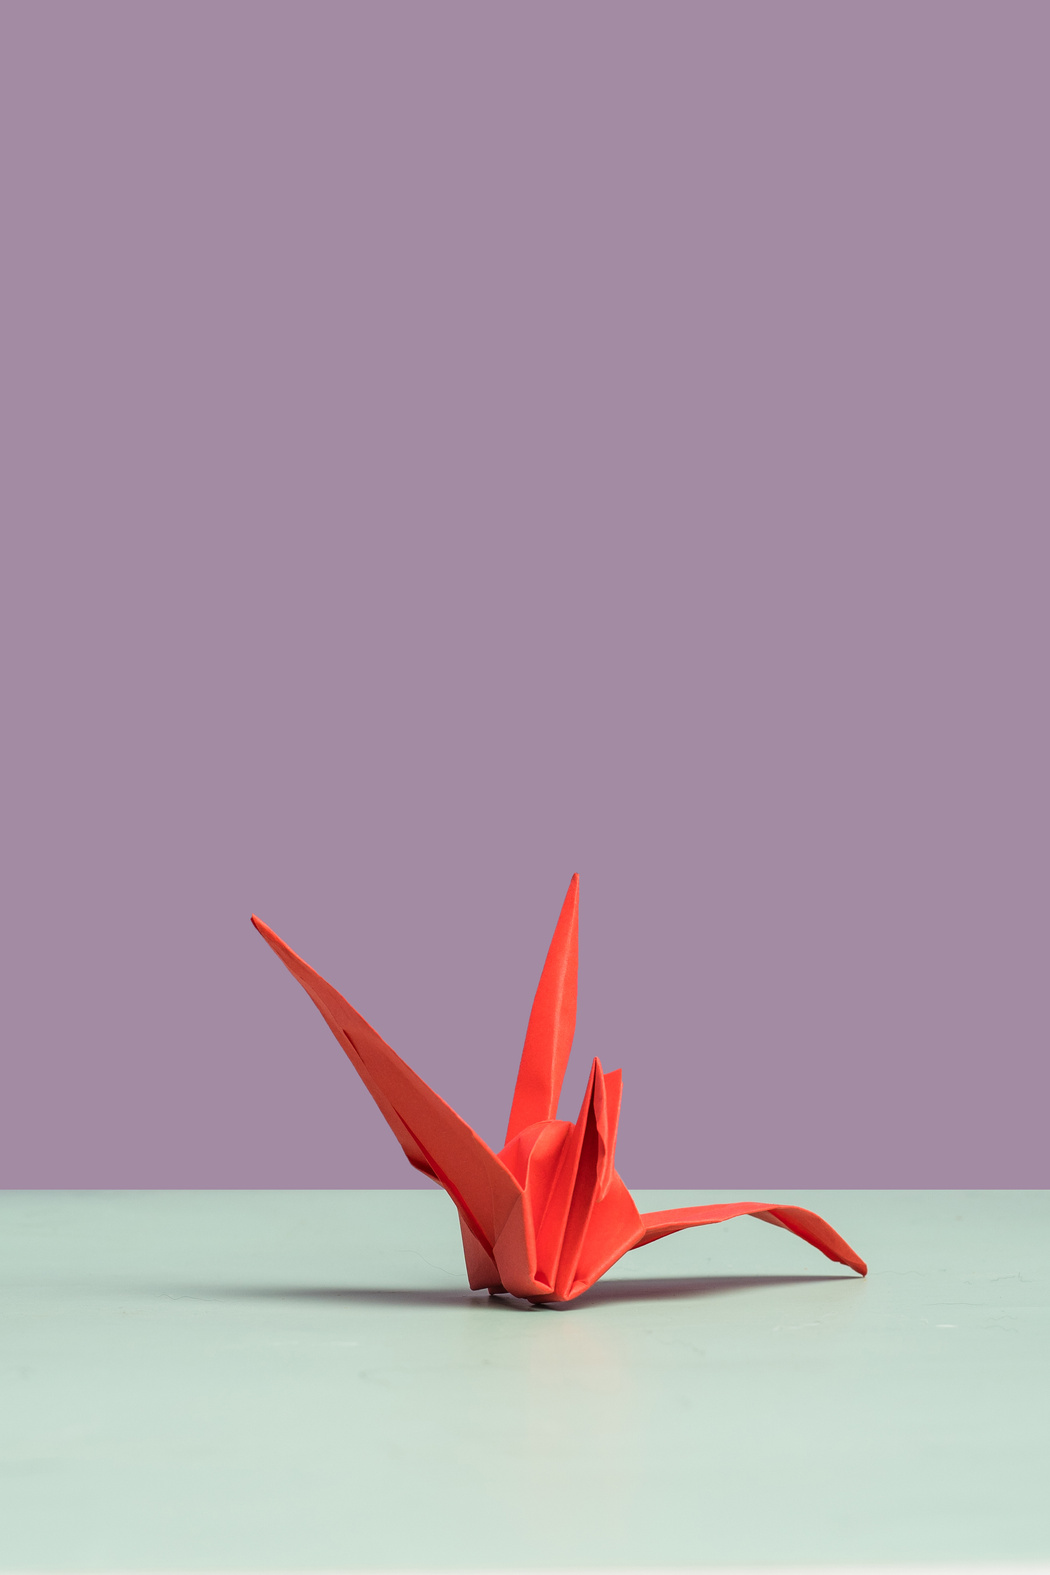 Red Swan Origami on Purple Background